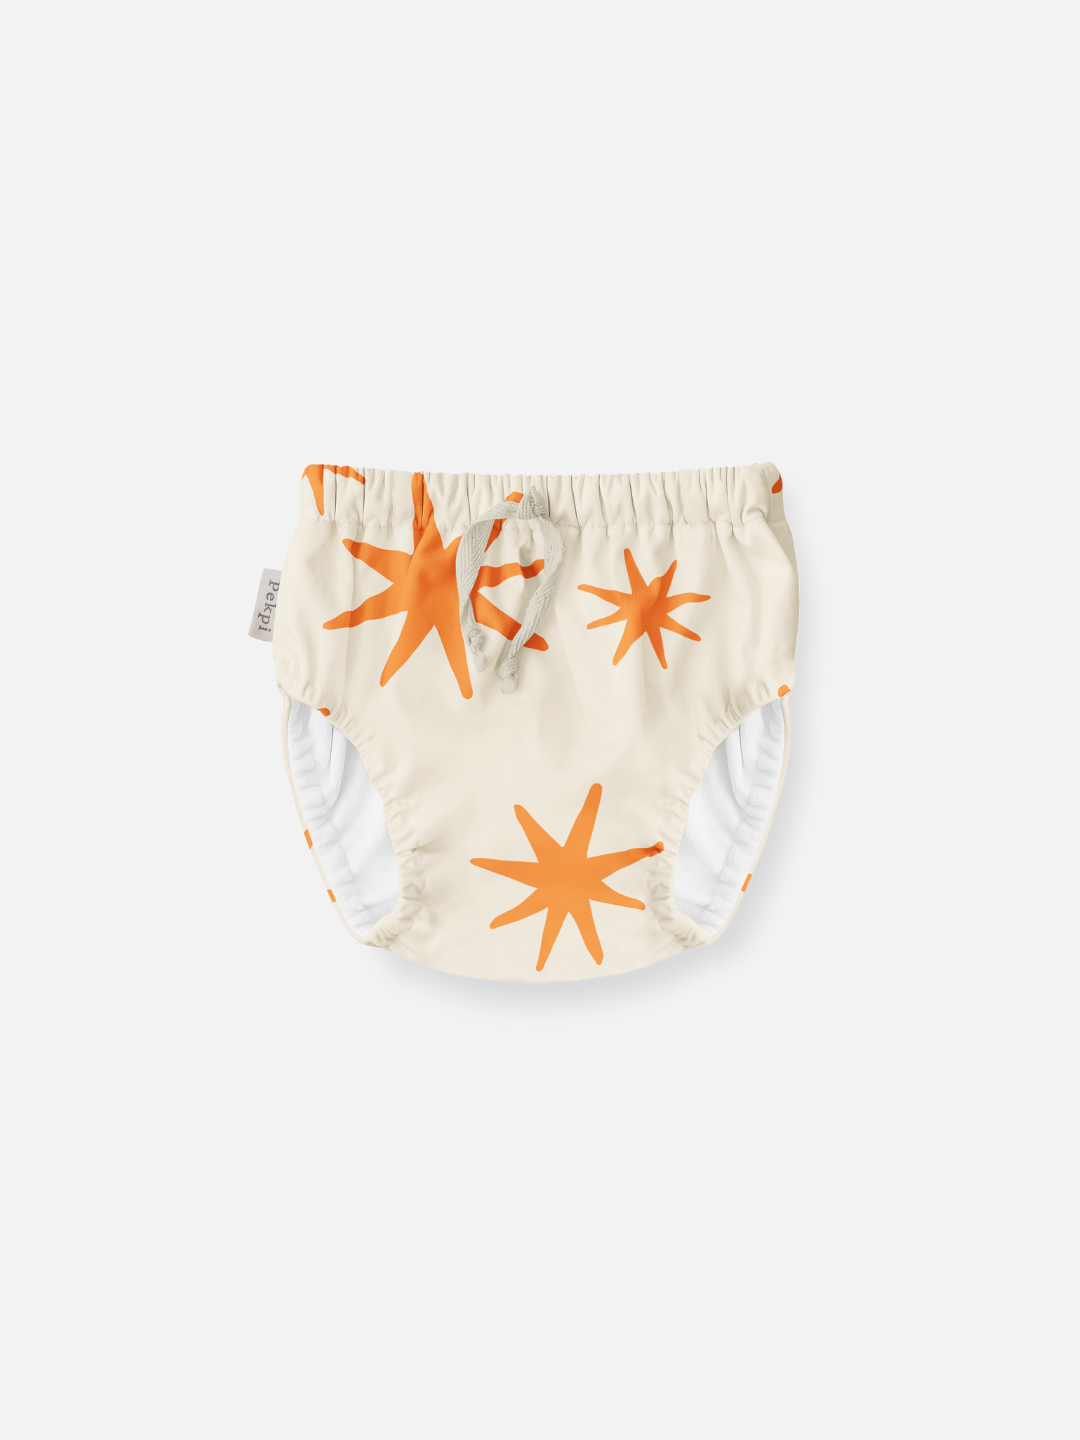 The front view of the swim diaper with an elastic waist with a tie and elastic leg holes. The diaper is a cream color with orange stars shapes all over.